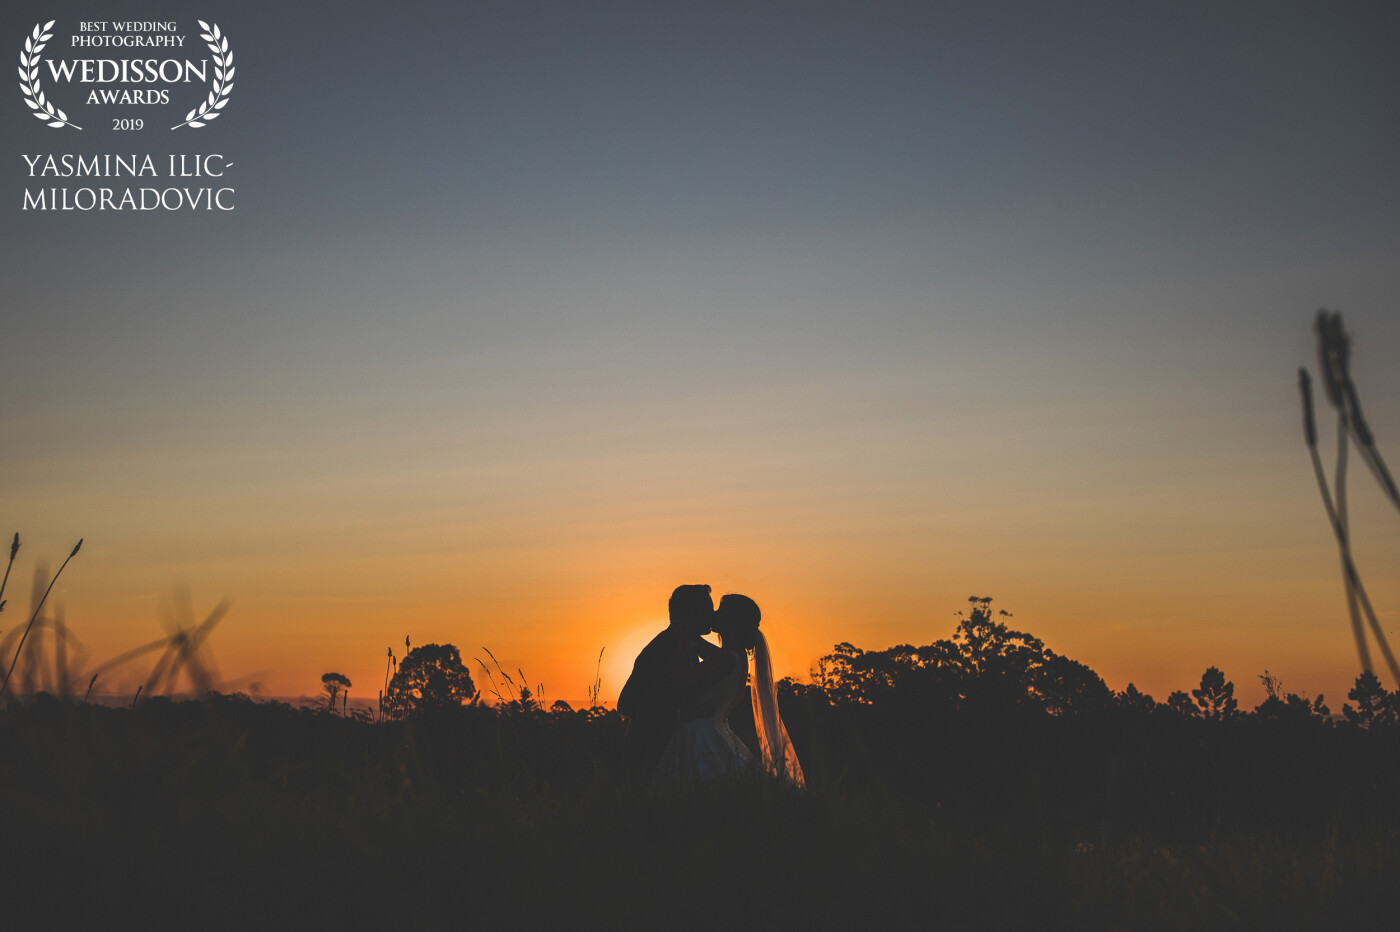 I had found an empty field right next to Megan and Toby's reception venue (Biviano's in Dural, Sydney) so had them go for a walk through the long grass. It just happened to be perfectly timed with the sunset. 